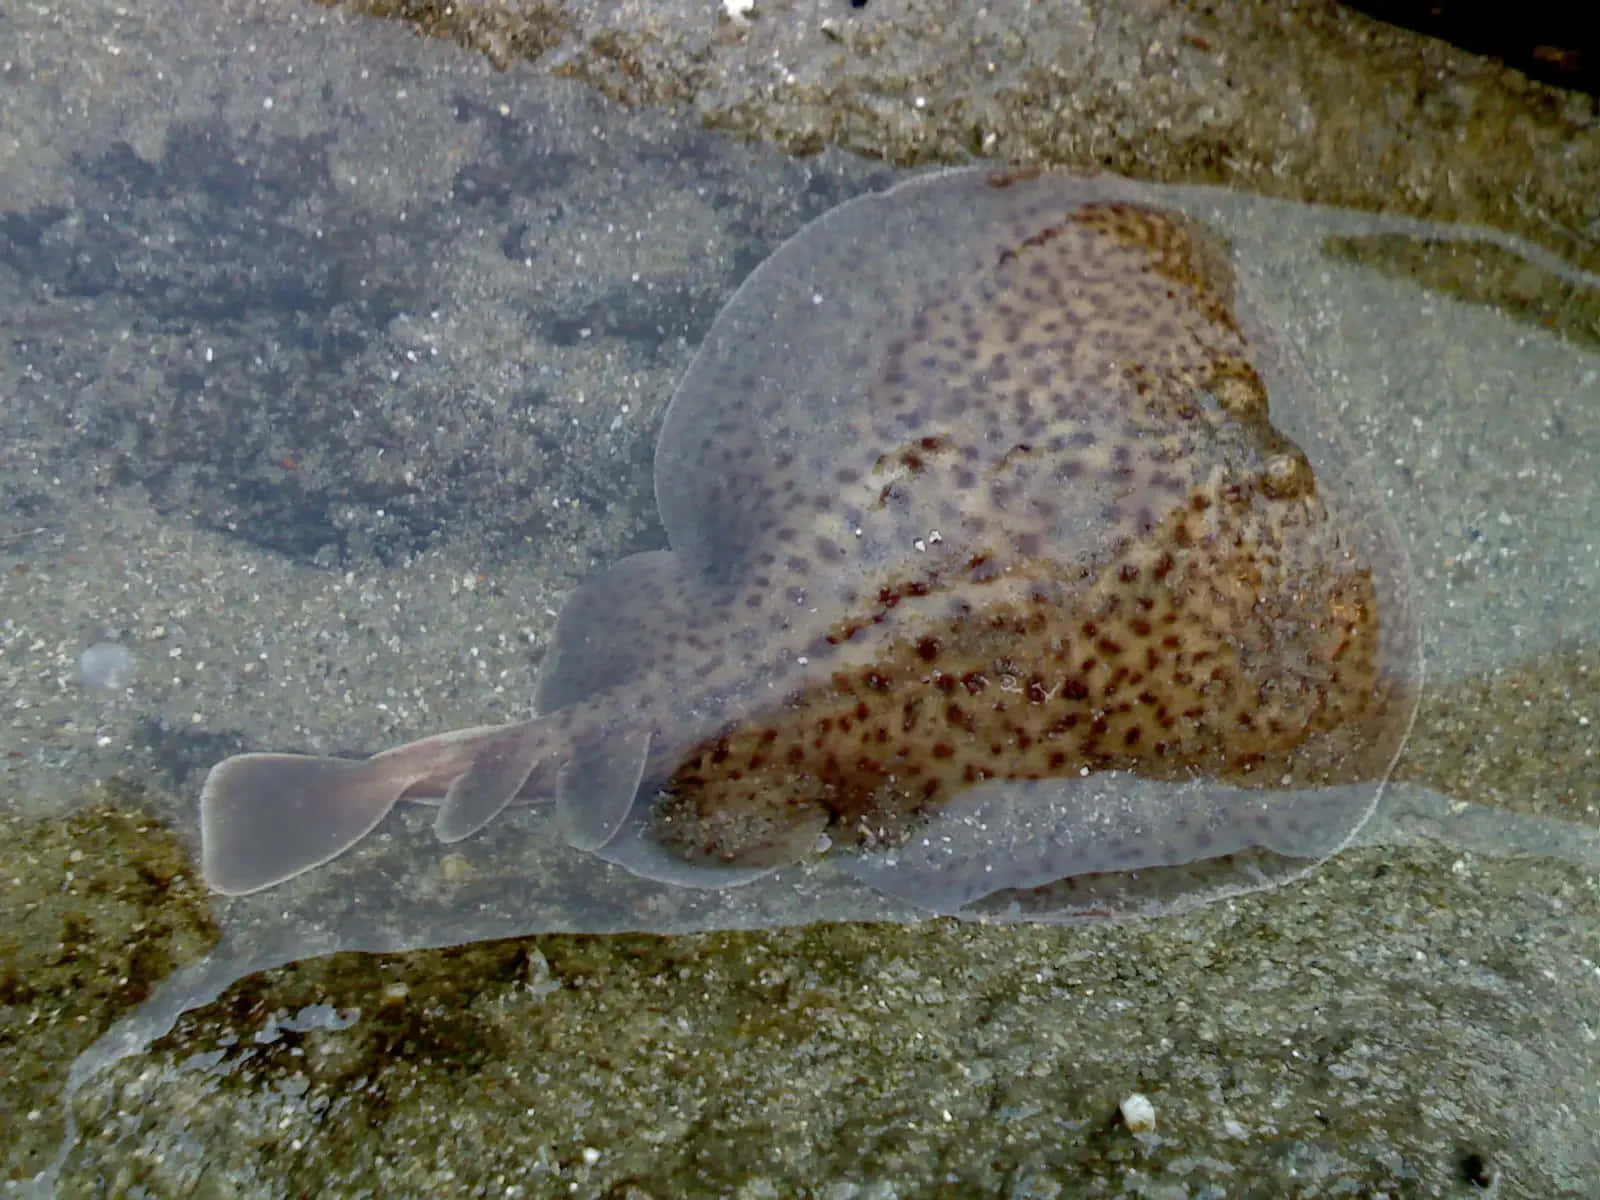 Electric Ray Camouflagedin Shallow Water Wallpaper